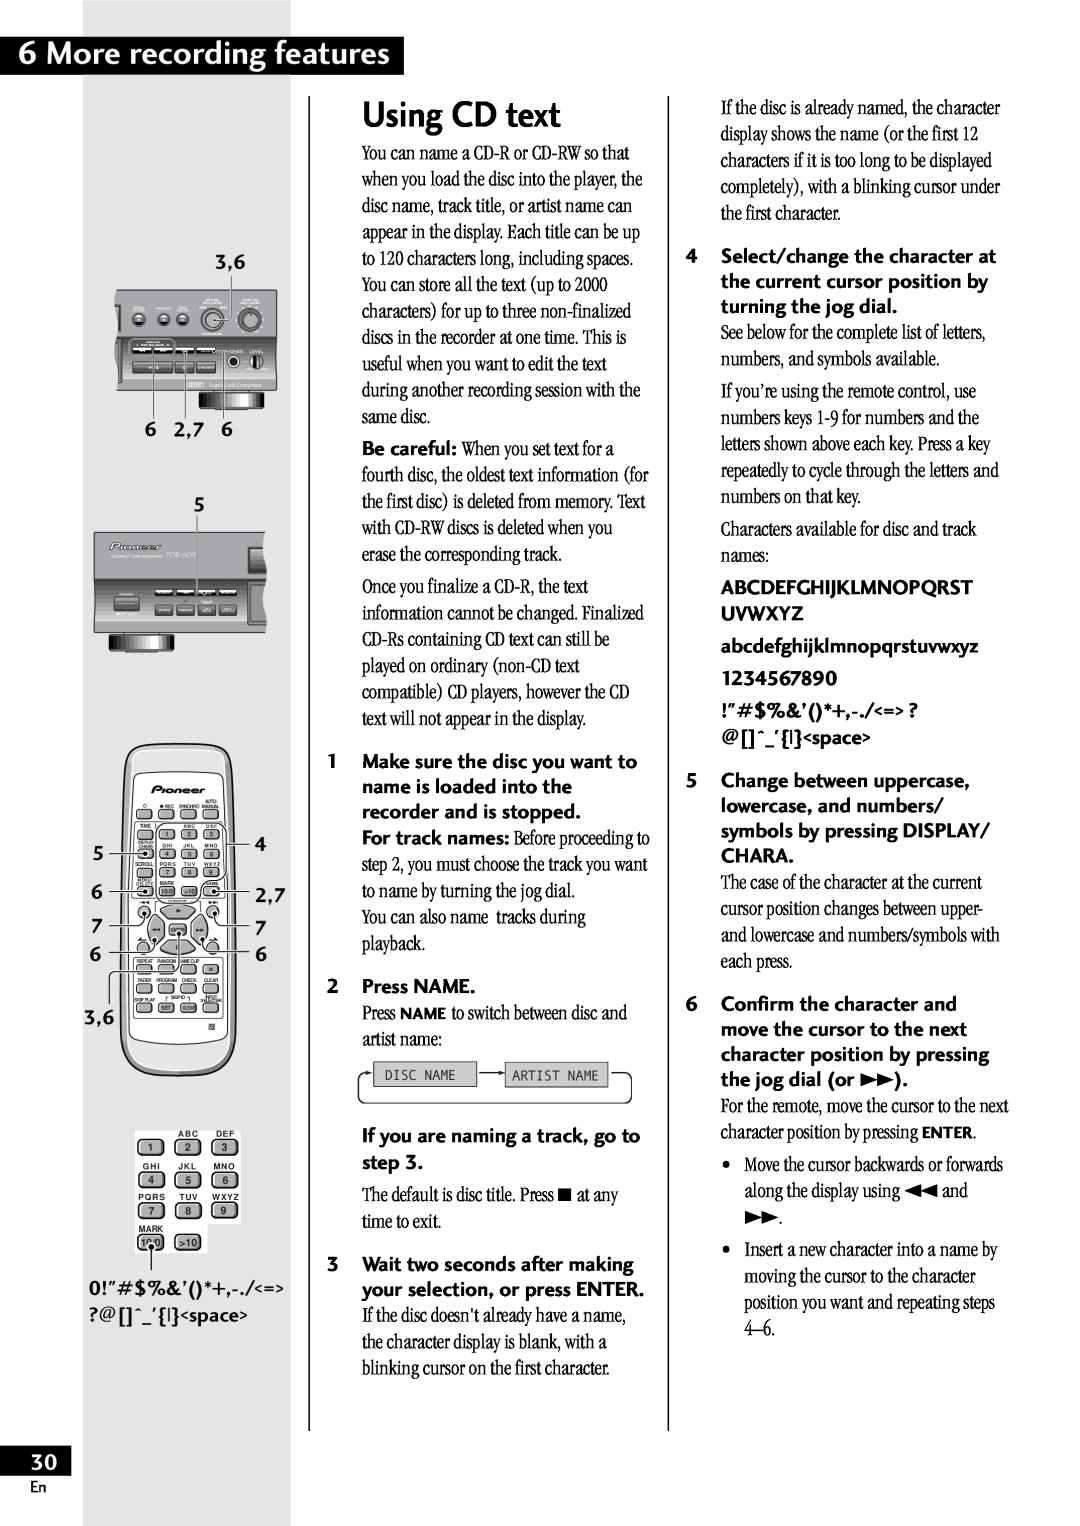 Pioneer PDR-609 operating instructions Using CD text, recording 